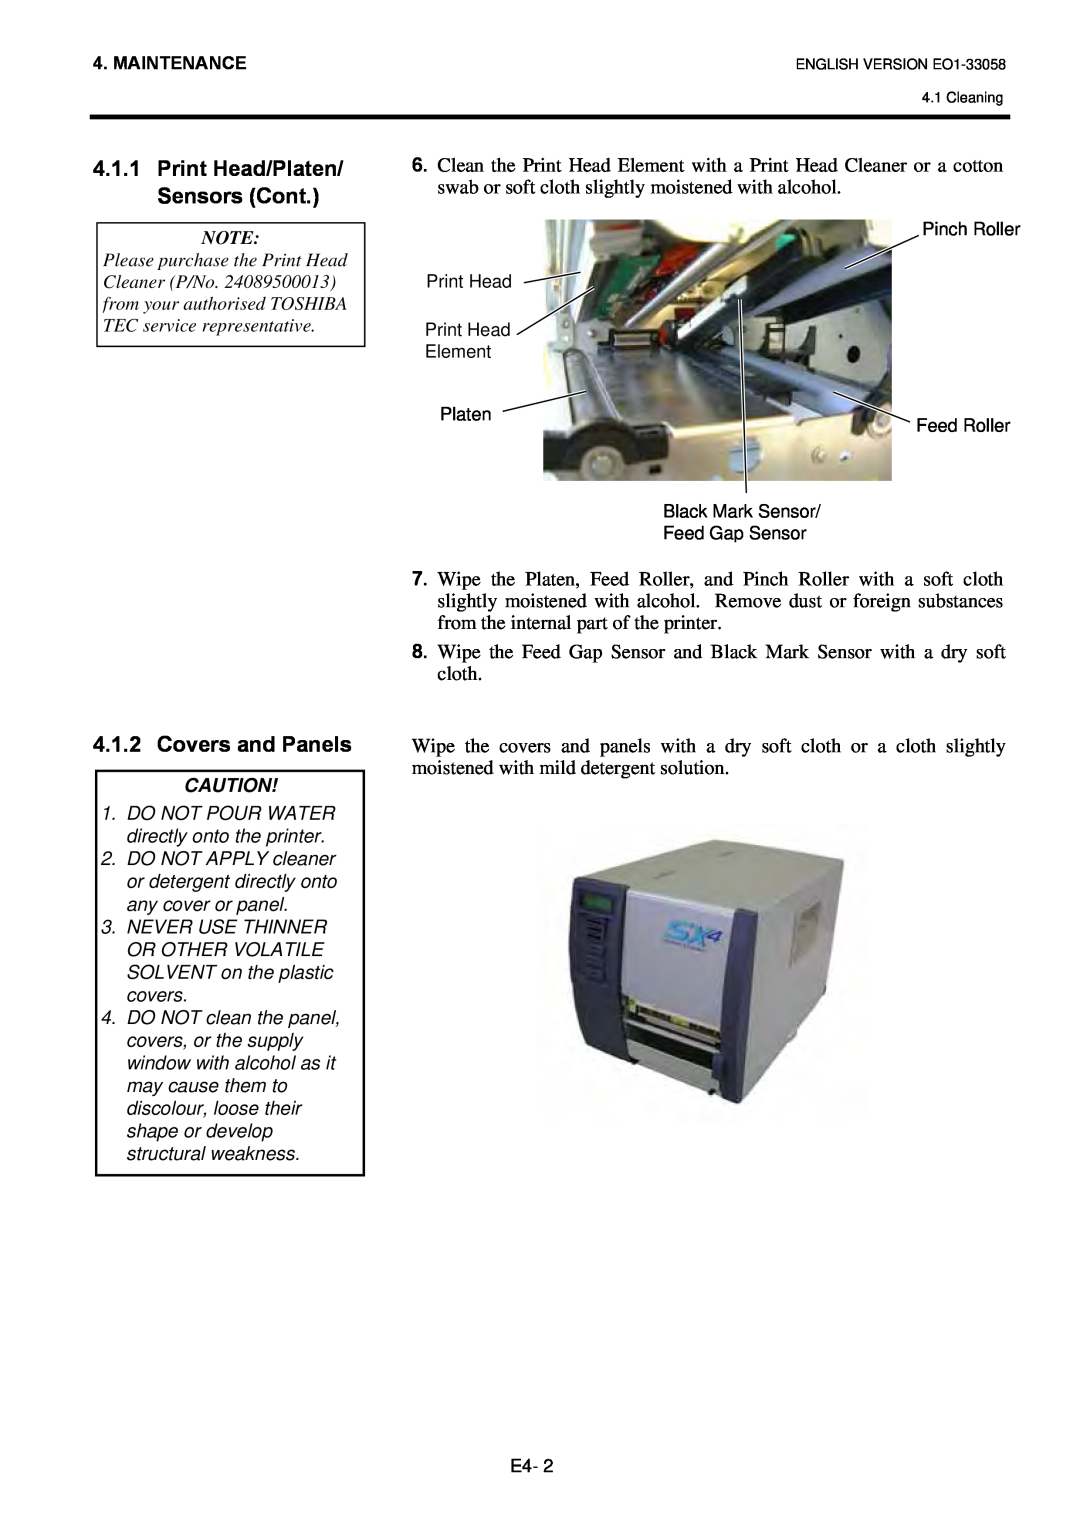 Toshiba B-SX4T owner manual Print Head/Platen/ Sensors Cont, Covers and Panels, DO NOT POUR WATER directly onto the printer 